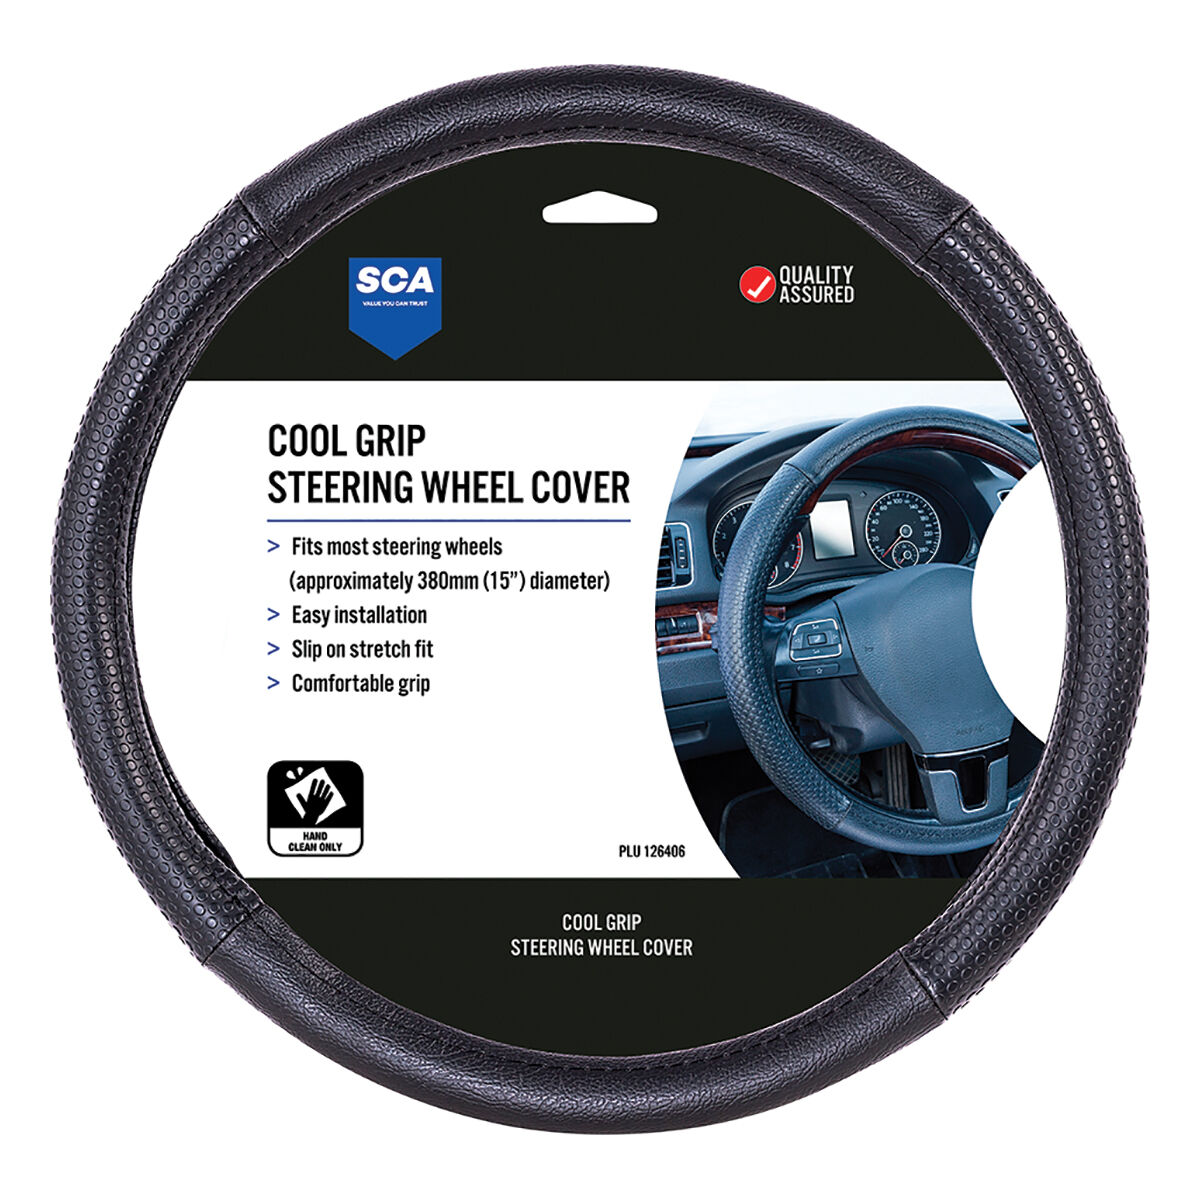 NEW DRIVERS STEERING WHEEL COVER BLUE-BLACK FITTED GLOVE EASY SLIP ON 